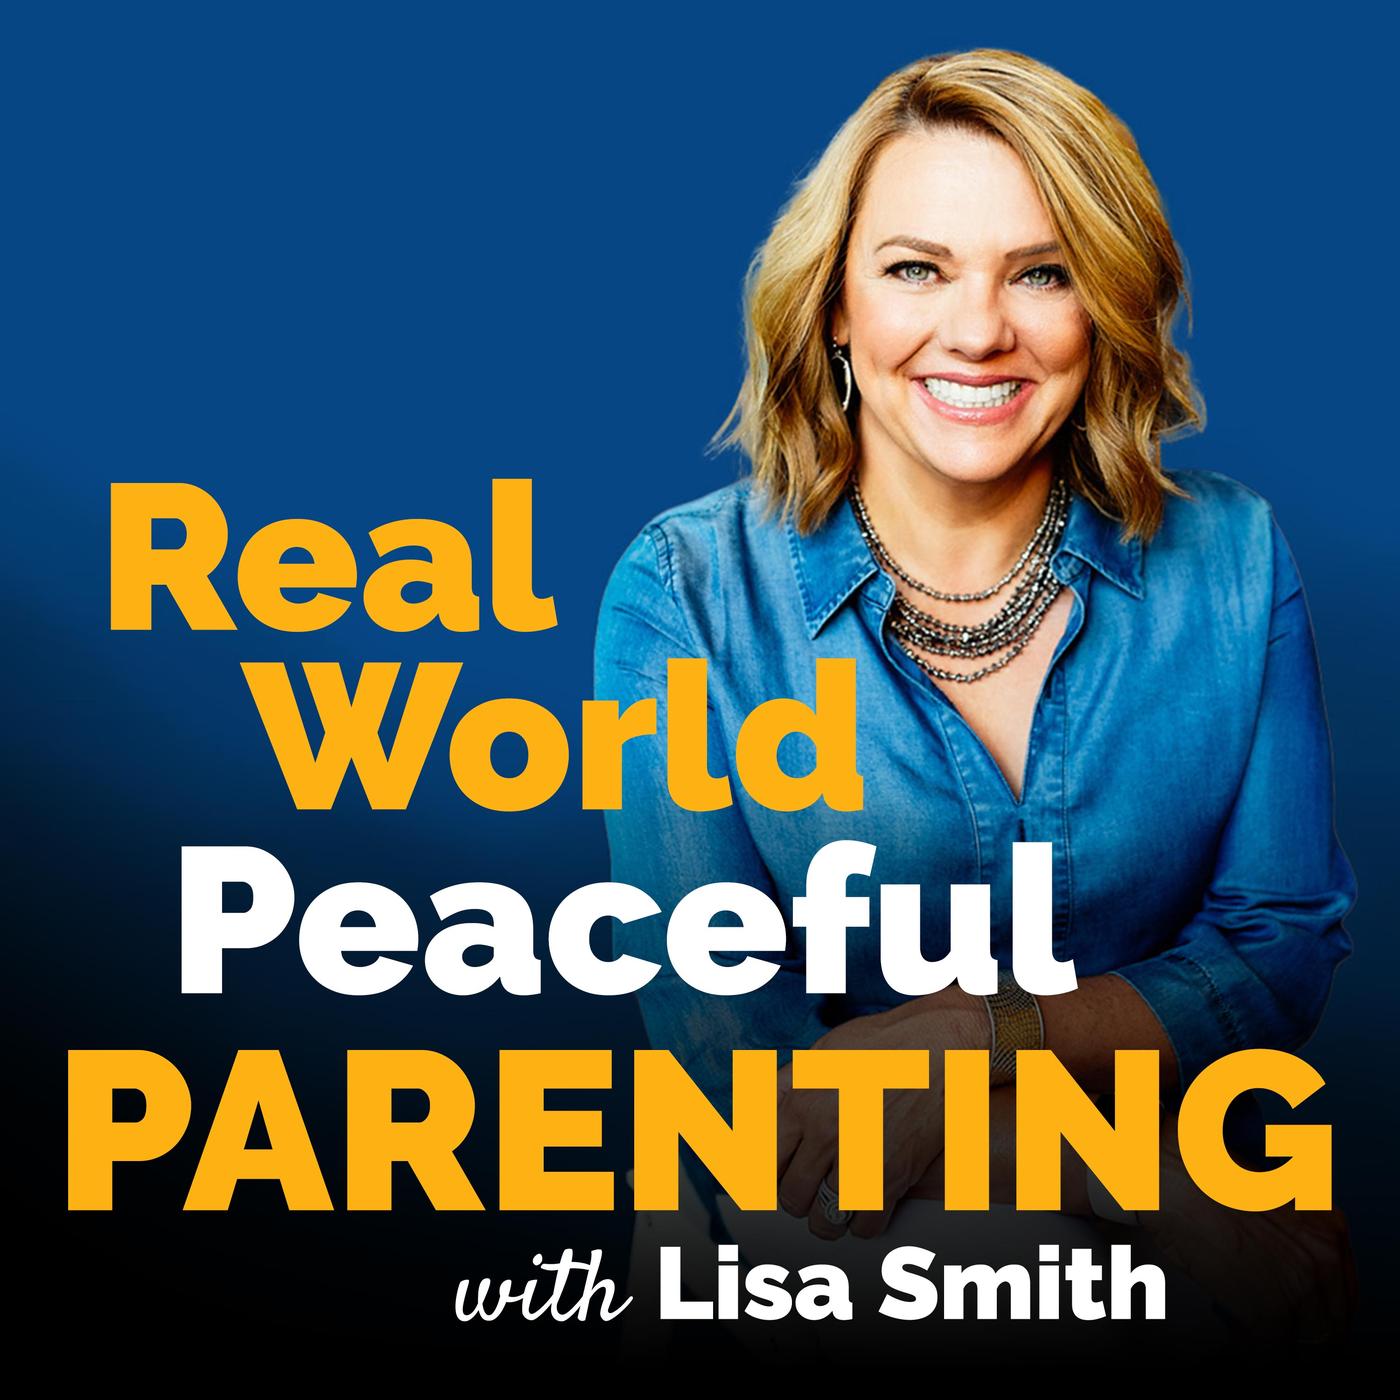 Real world peaceful parenting with lisa smith.